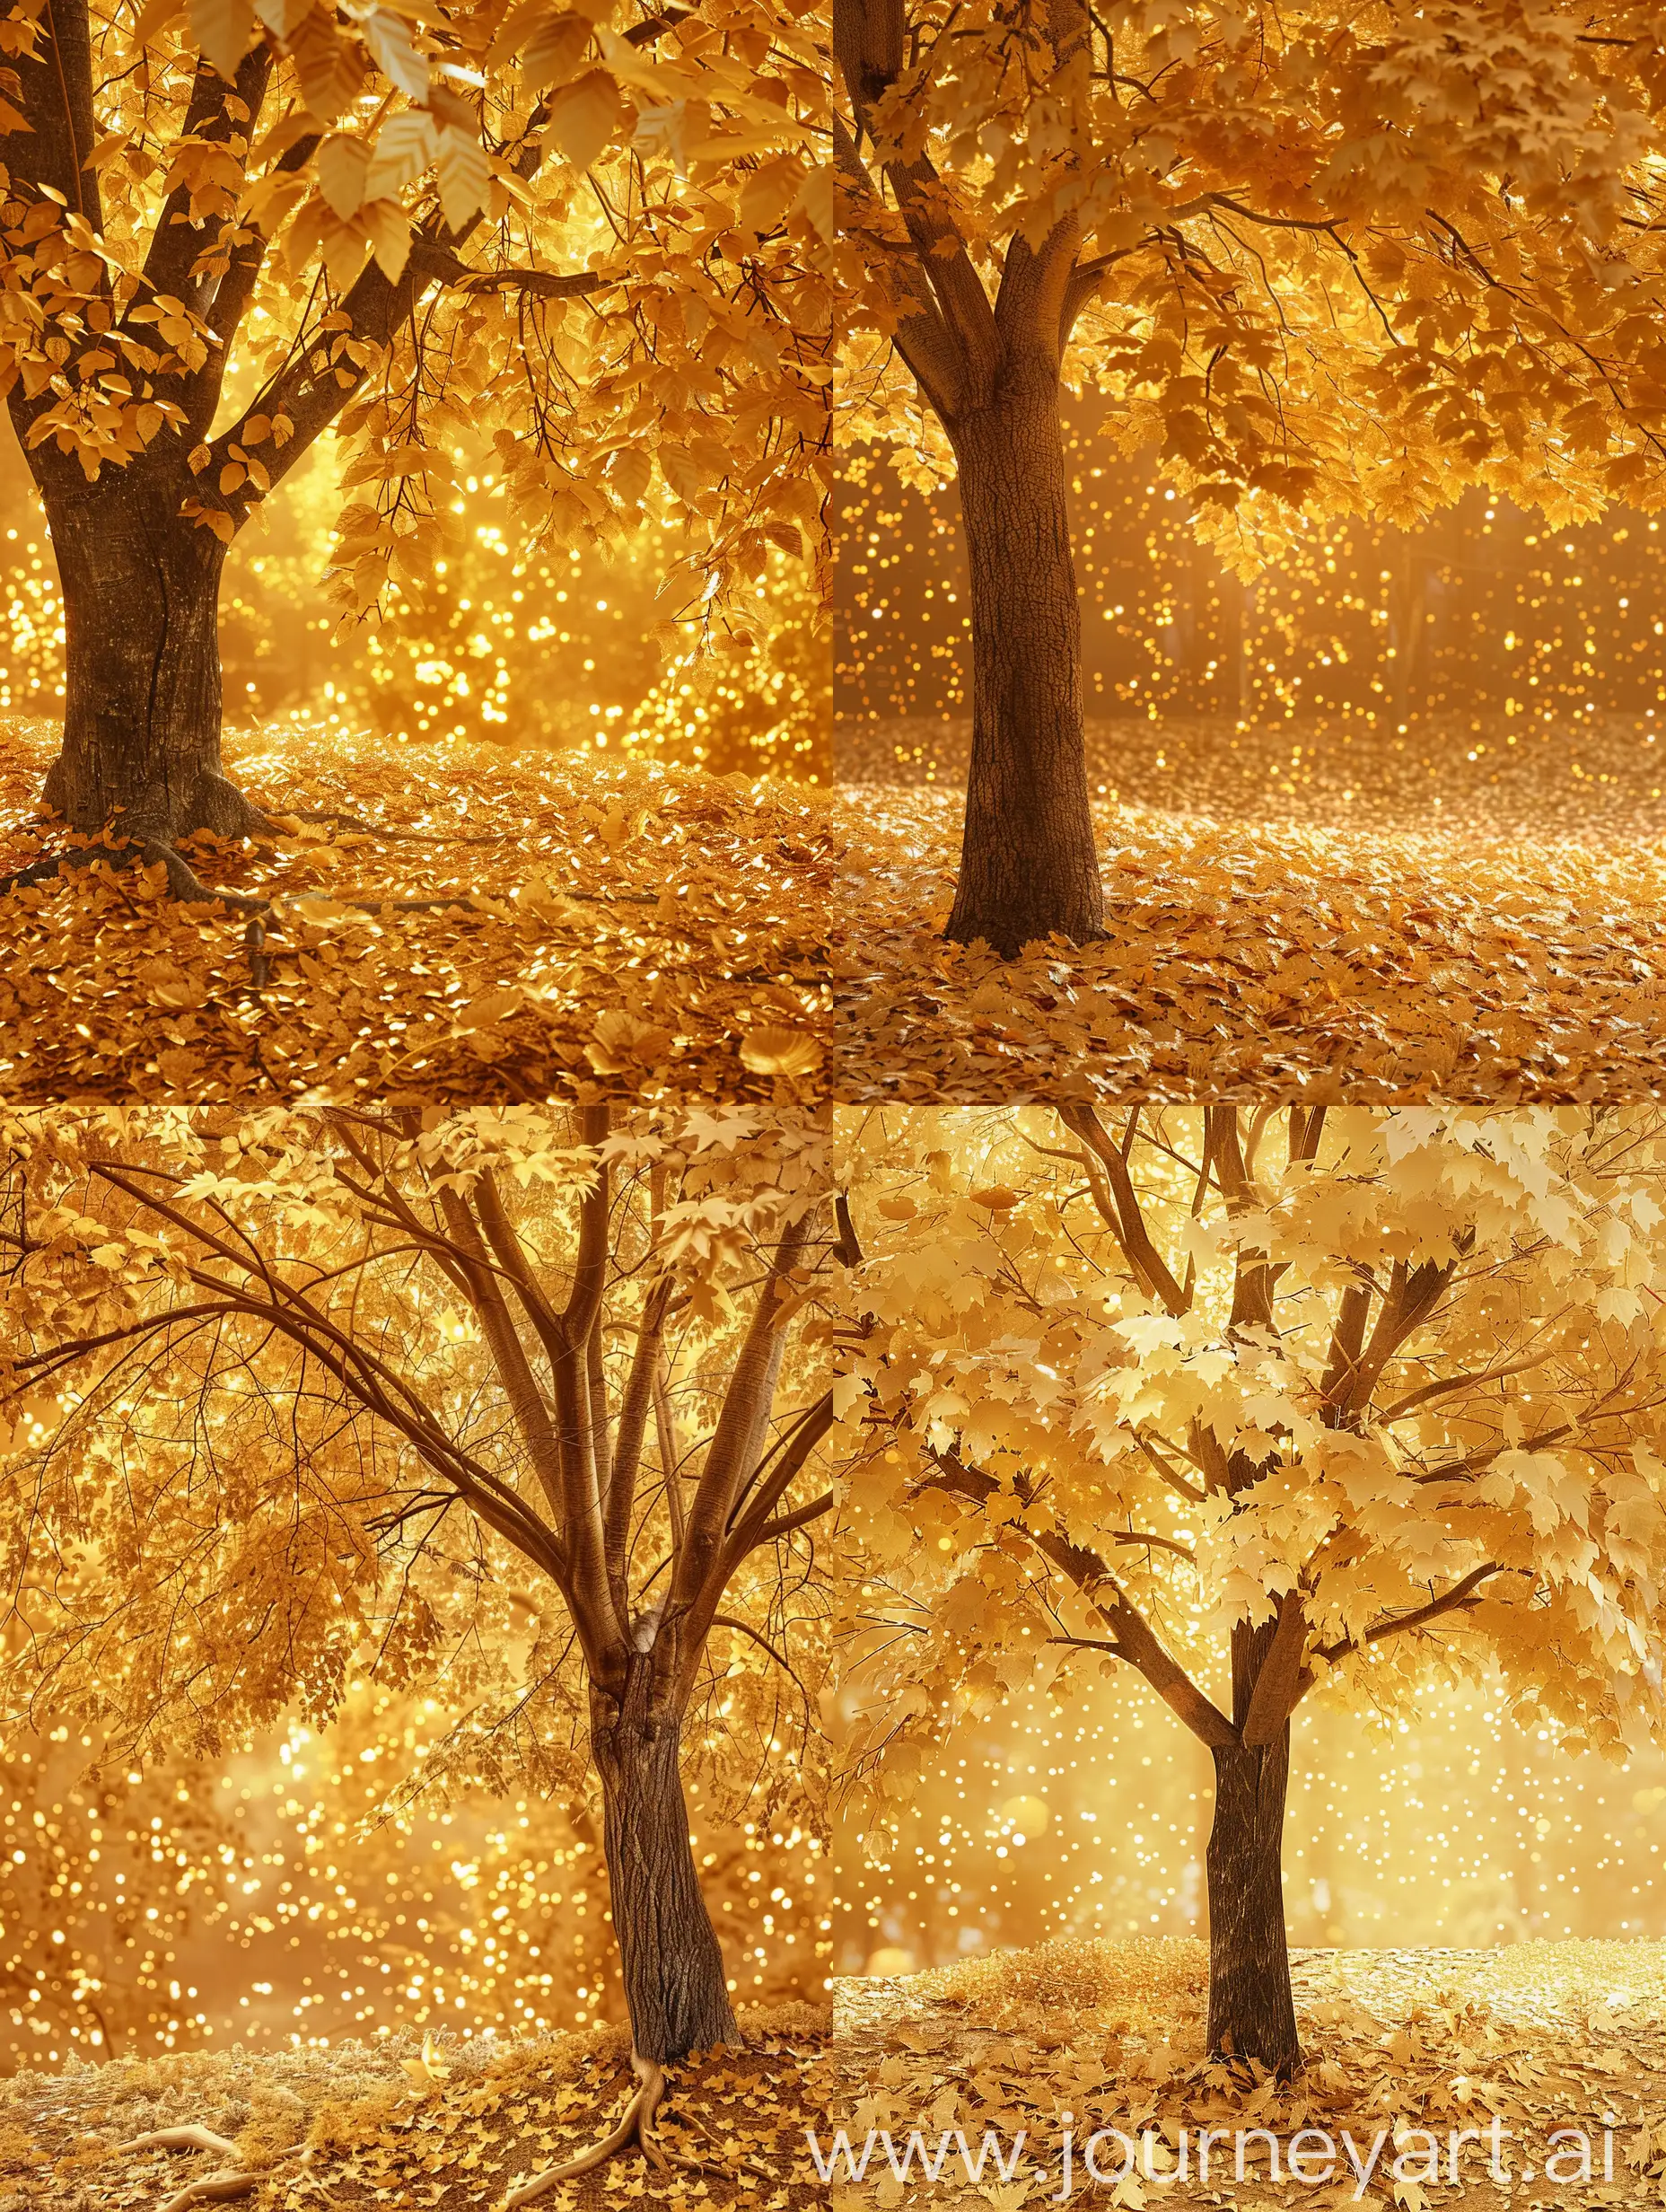 Golden-Tree-with-Fallen-Leaves-in-Surrealistic-Photography